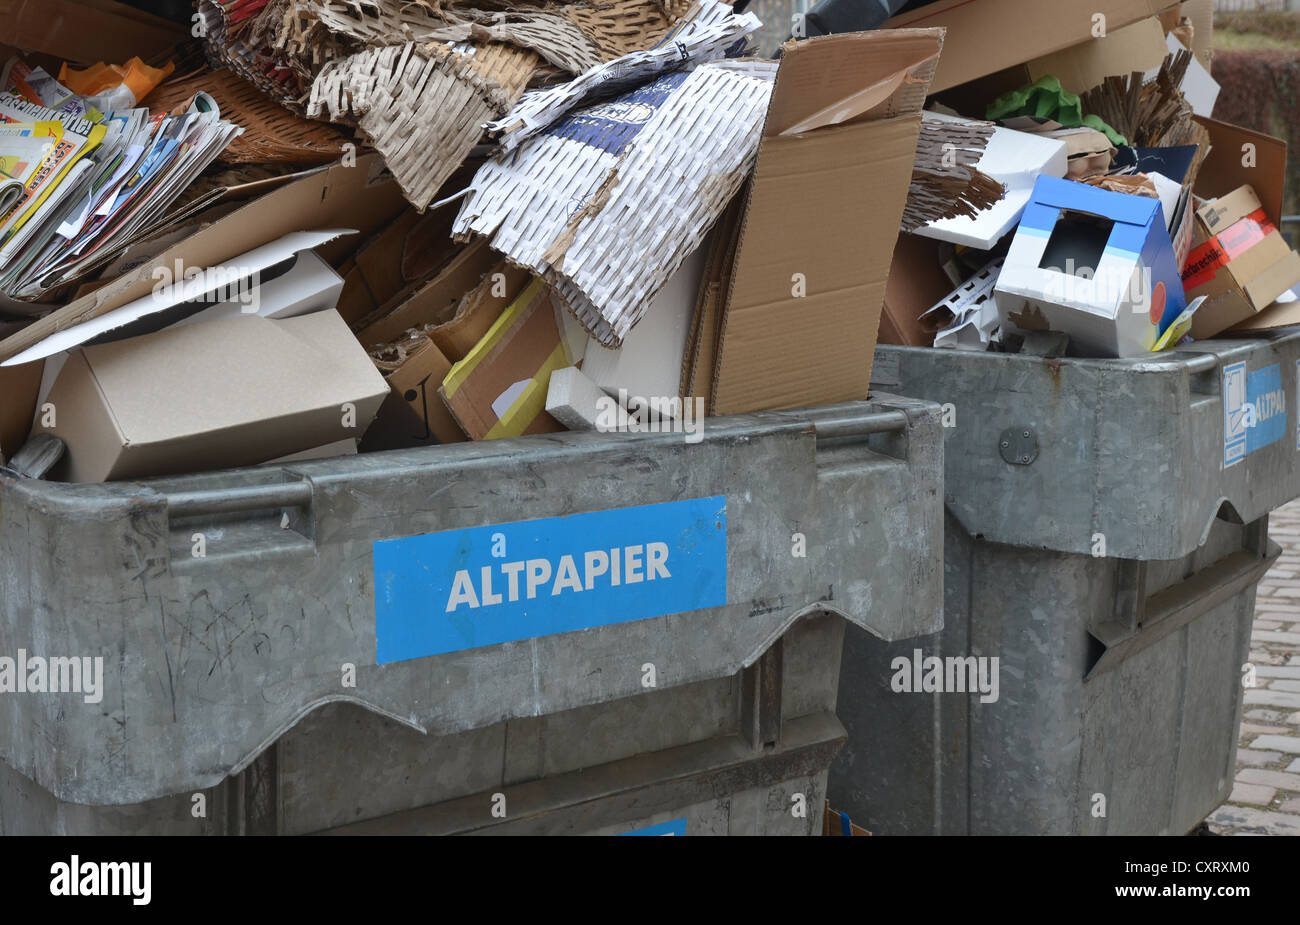 Paper recycling container, Saxony, Germany, Europe Stock Photo